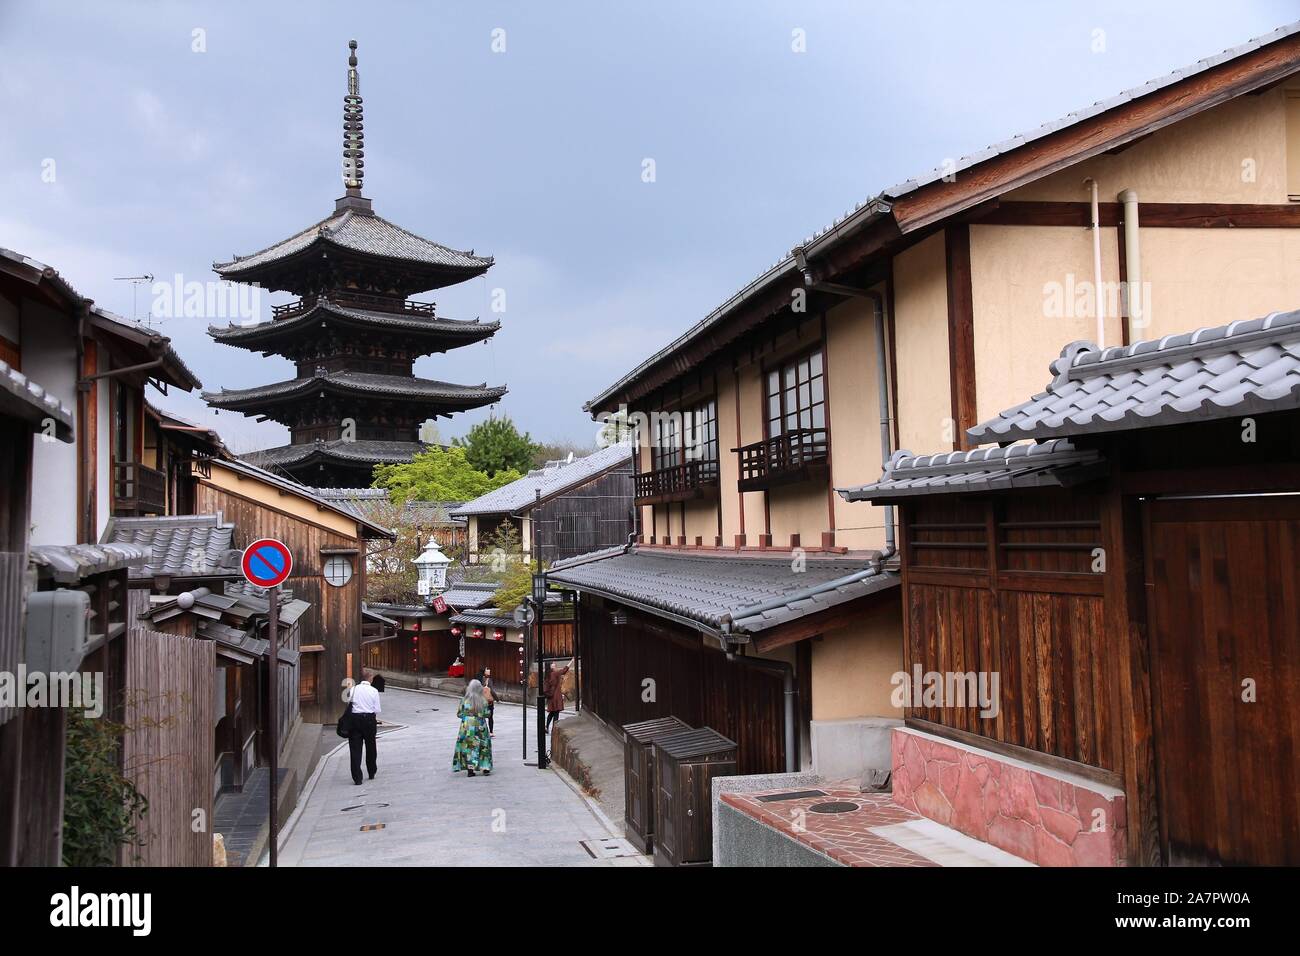 KYOTO, JAPAN - APRIL 19, 2012: People visit old town of Gion district, Kyoto, Japan. Old Kyoto is a UNESCO World Heritage site and was visited by almo Stock Photo